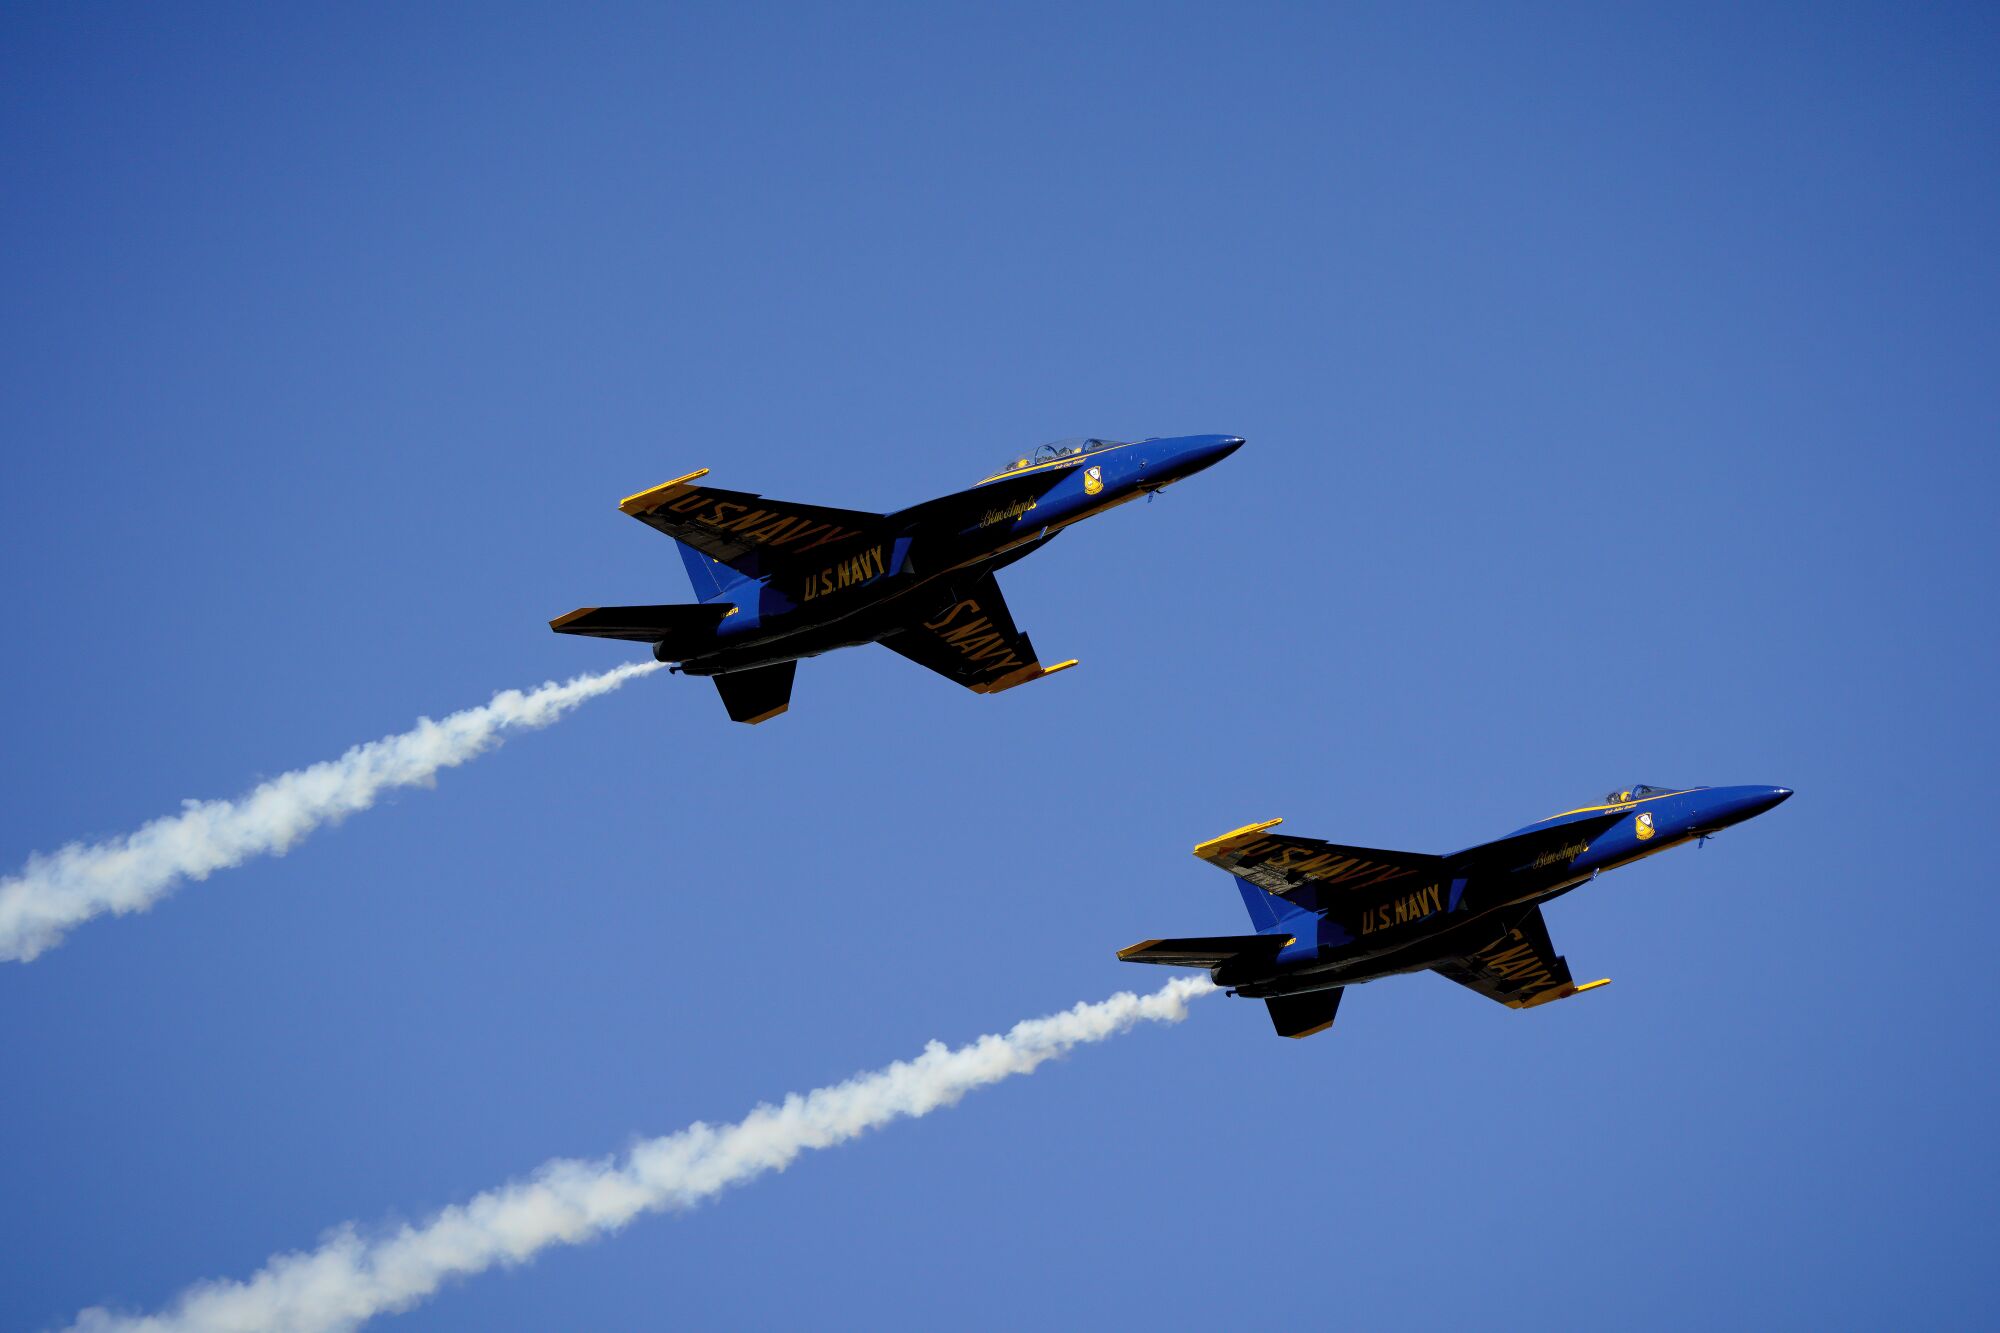 The Navy Blue Angles precision flight team practiced in the skies above MCAS before the annual MCAS Miramar Airshow 2022.